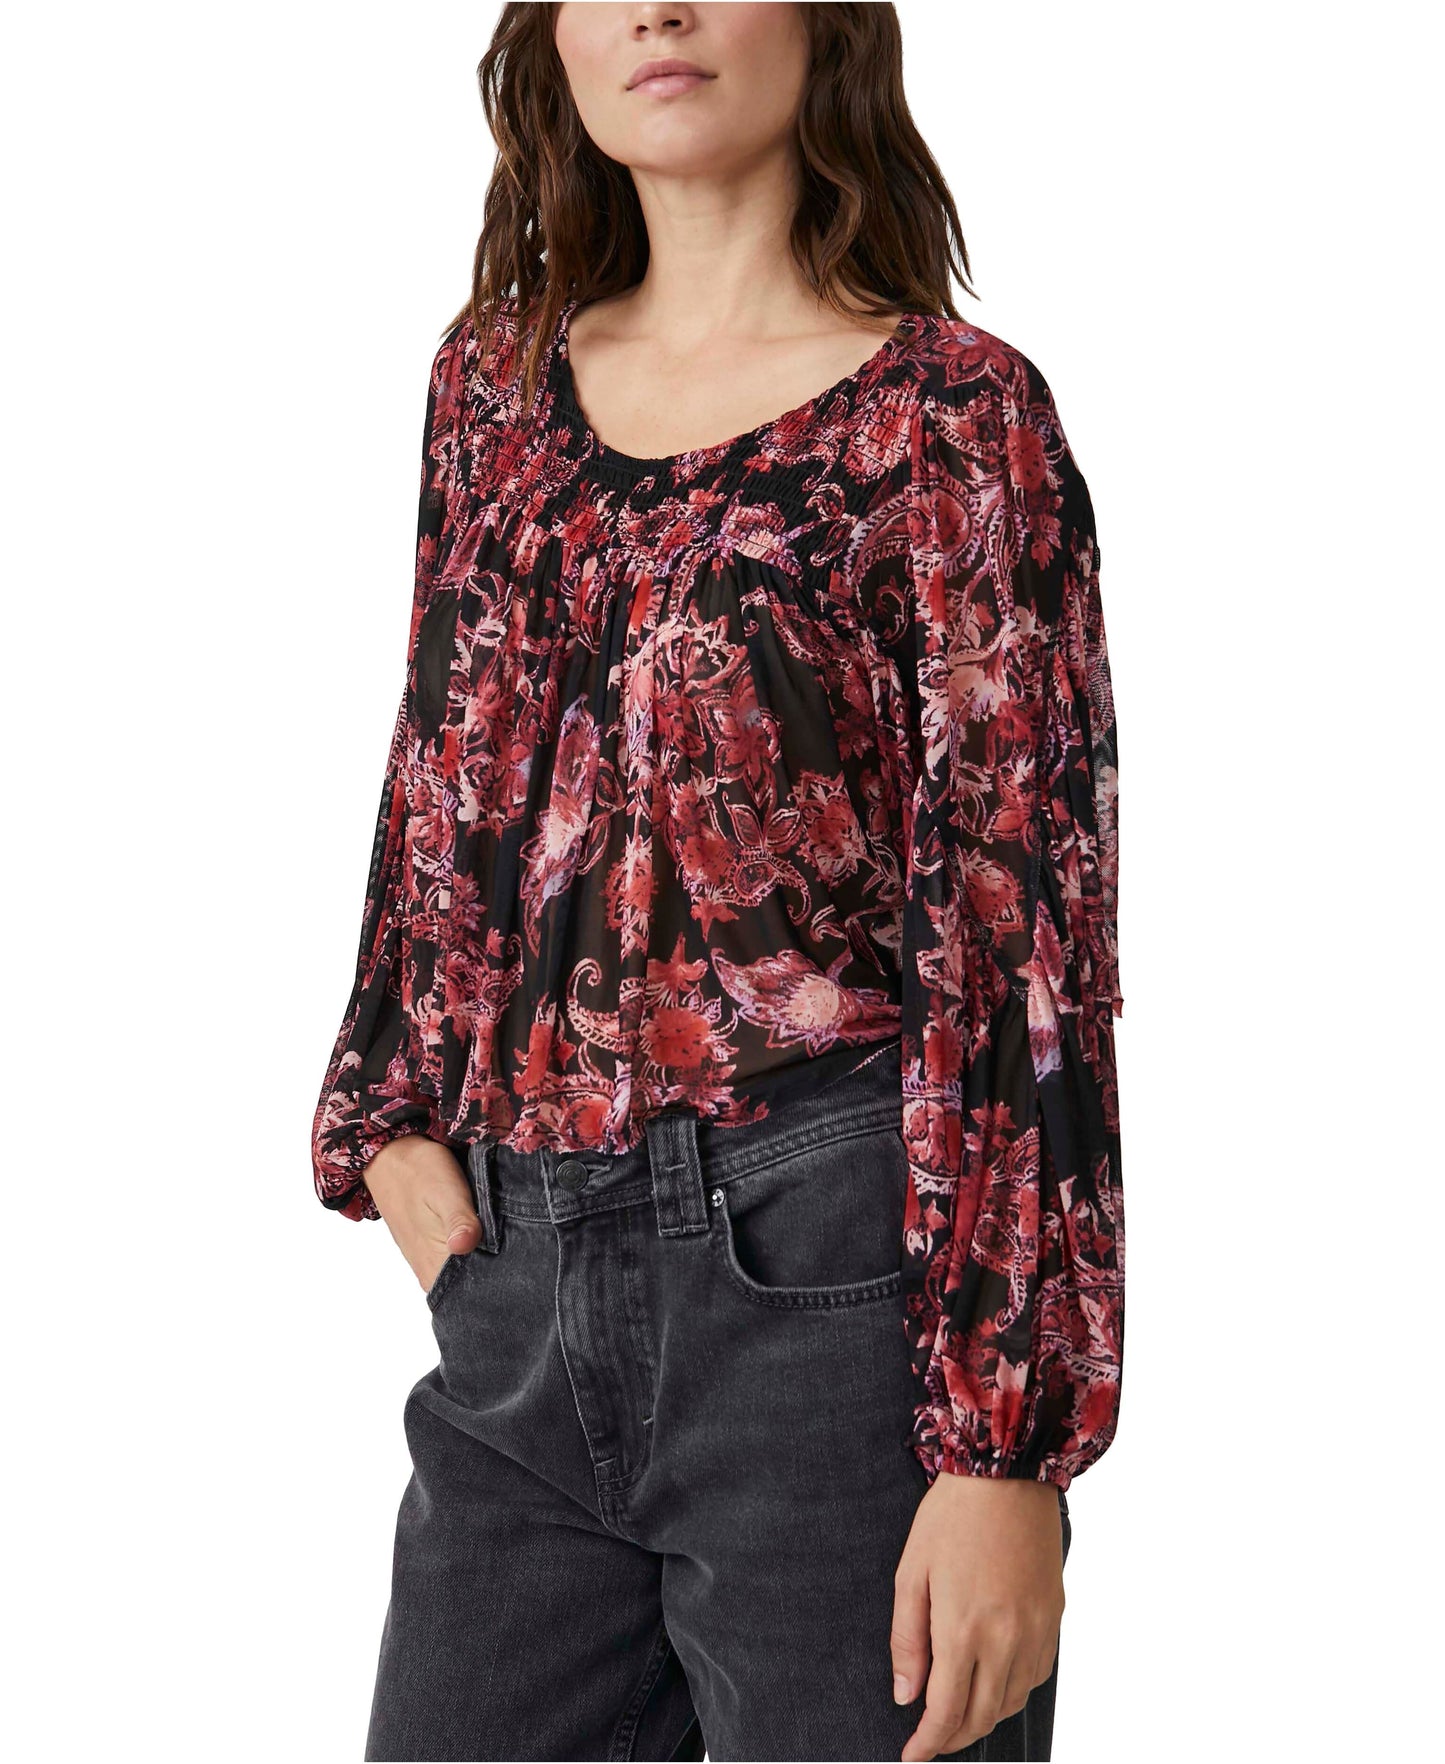 Free People Up For Anything Top